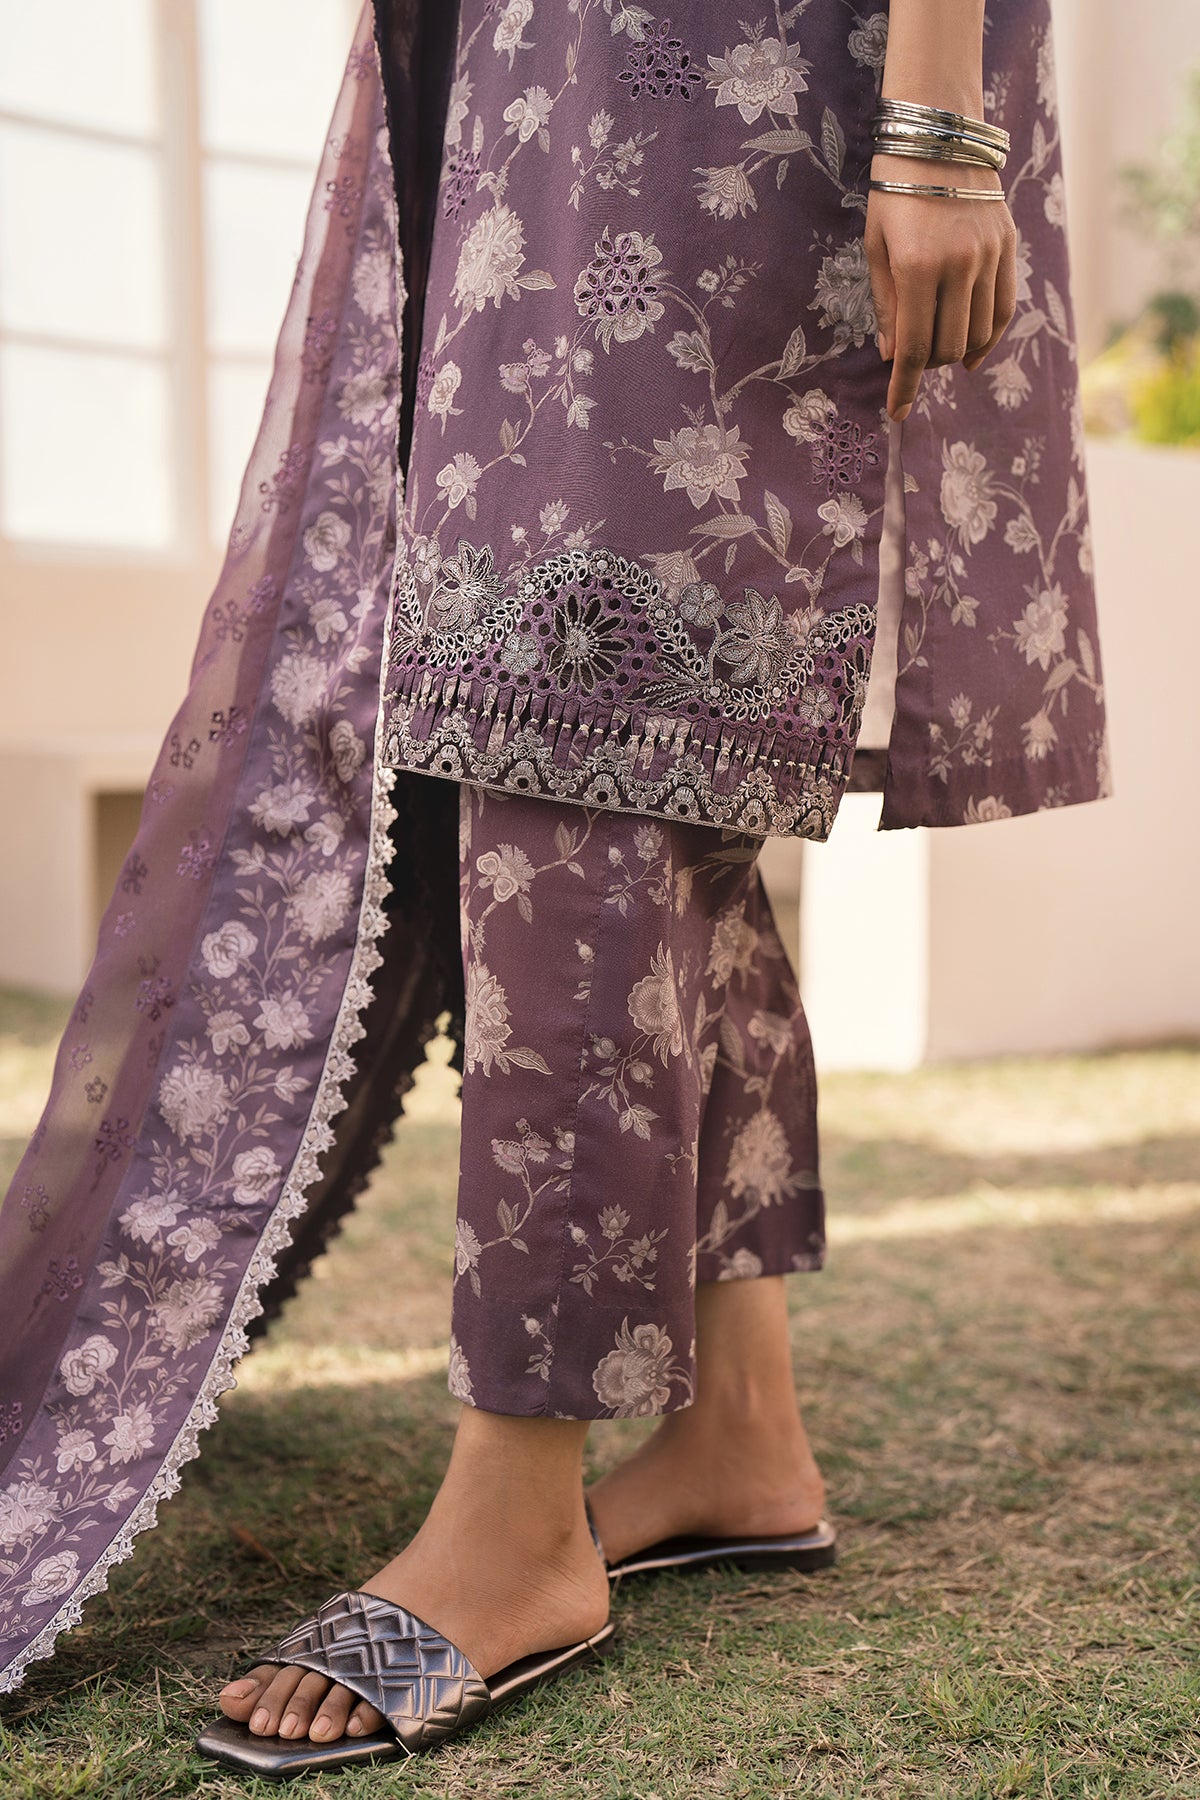 EMBROIDERED PRINTED LAWN UF-598